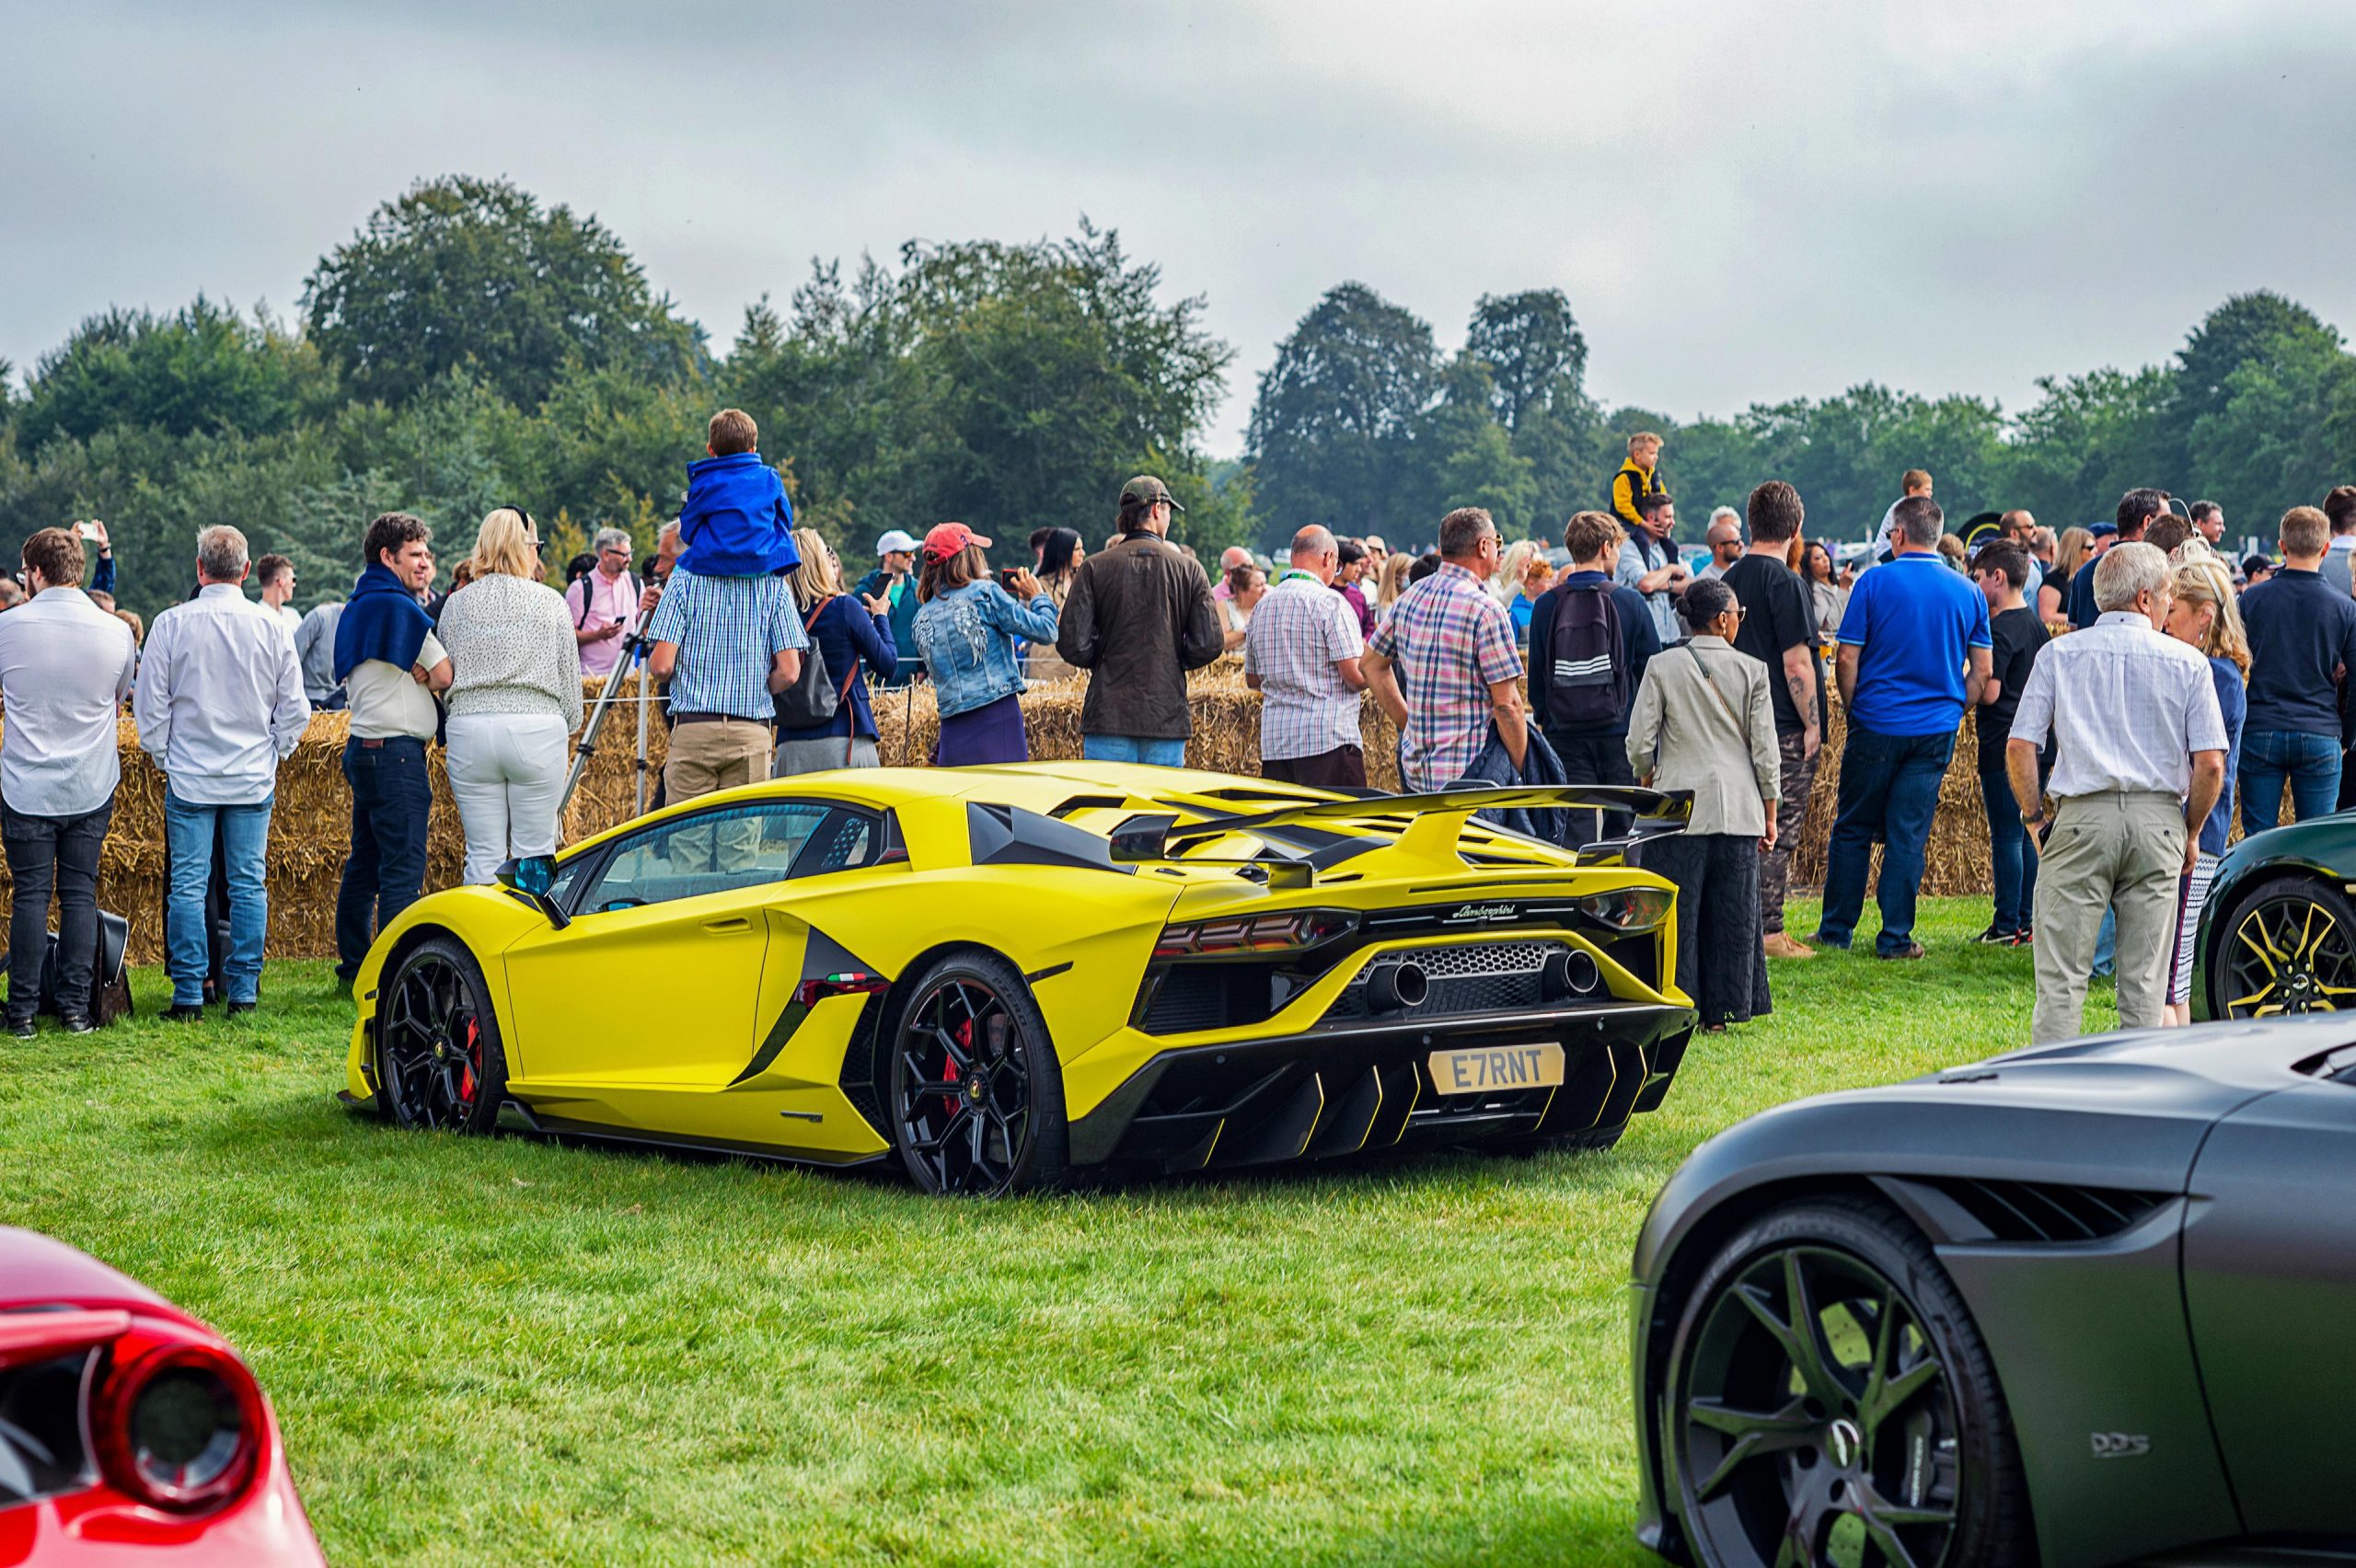 A vibrant green Lamborghini sits prominently on the grass beside a race track, with spectators lining the track, watching cars race by at a thrilling car event in London. The focus of the shot is on the striking green Lamborghini in the foreground.